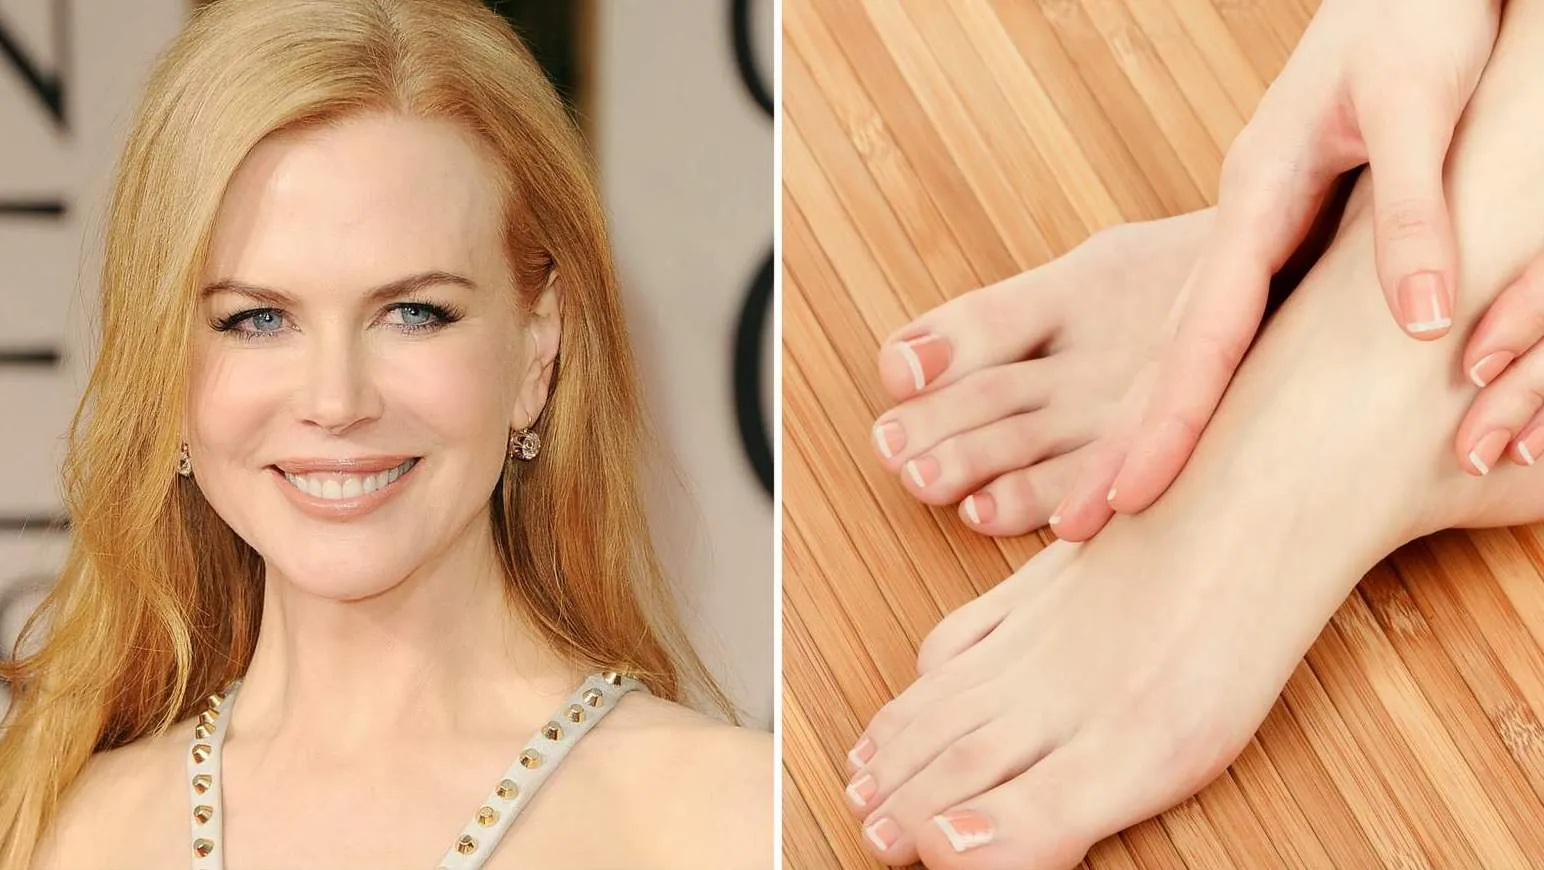 Related image of Top Sexiest Celebrity Feet Ranked By Wikifeet Therichest.